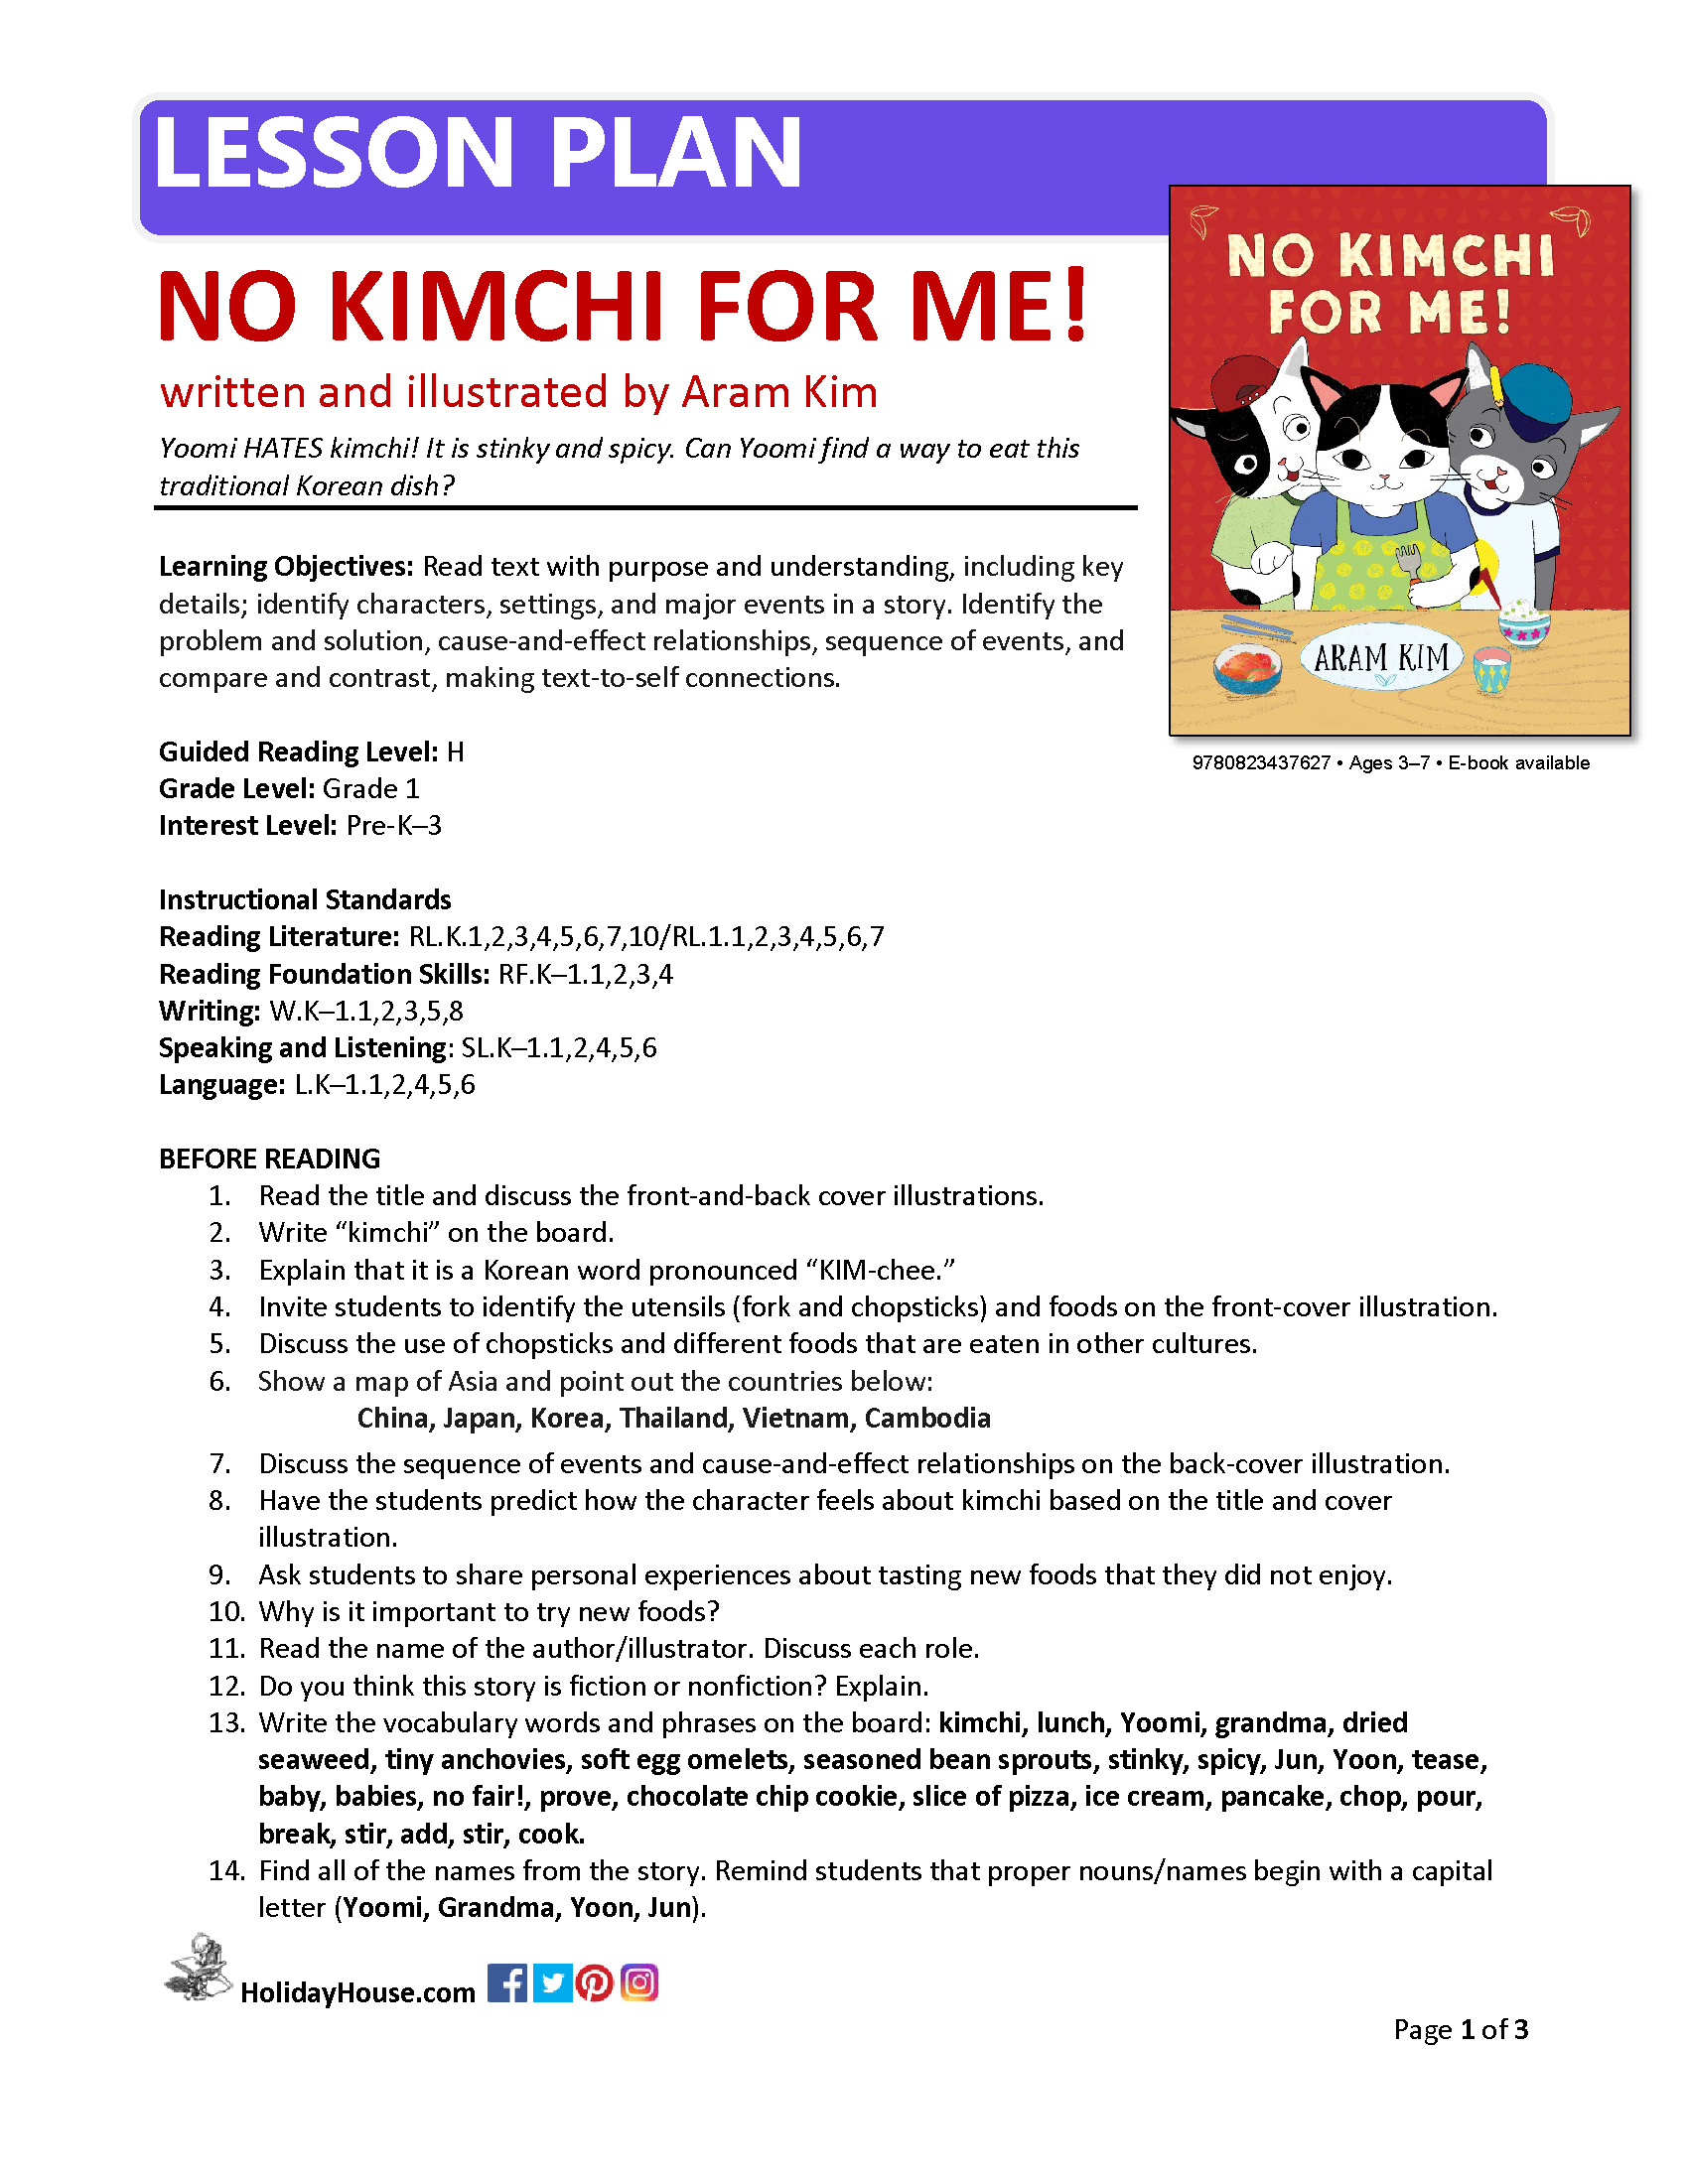 Download the official Lesson Plan for NO KIMCHI FOR ME!